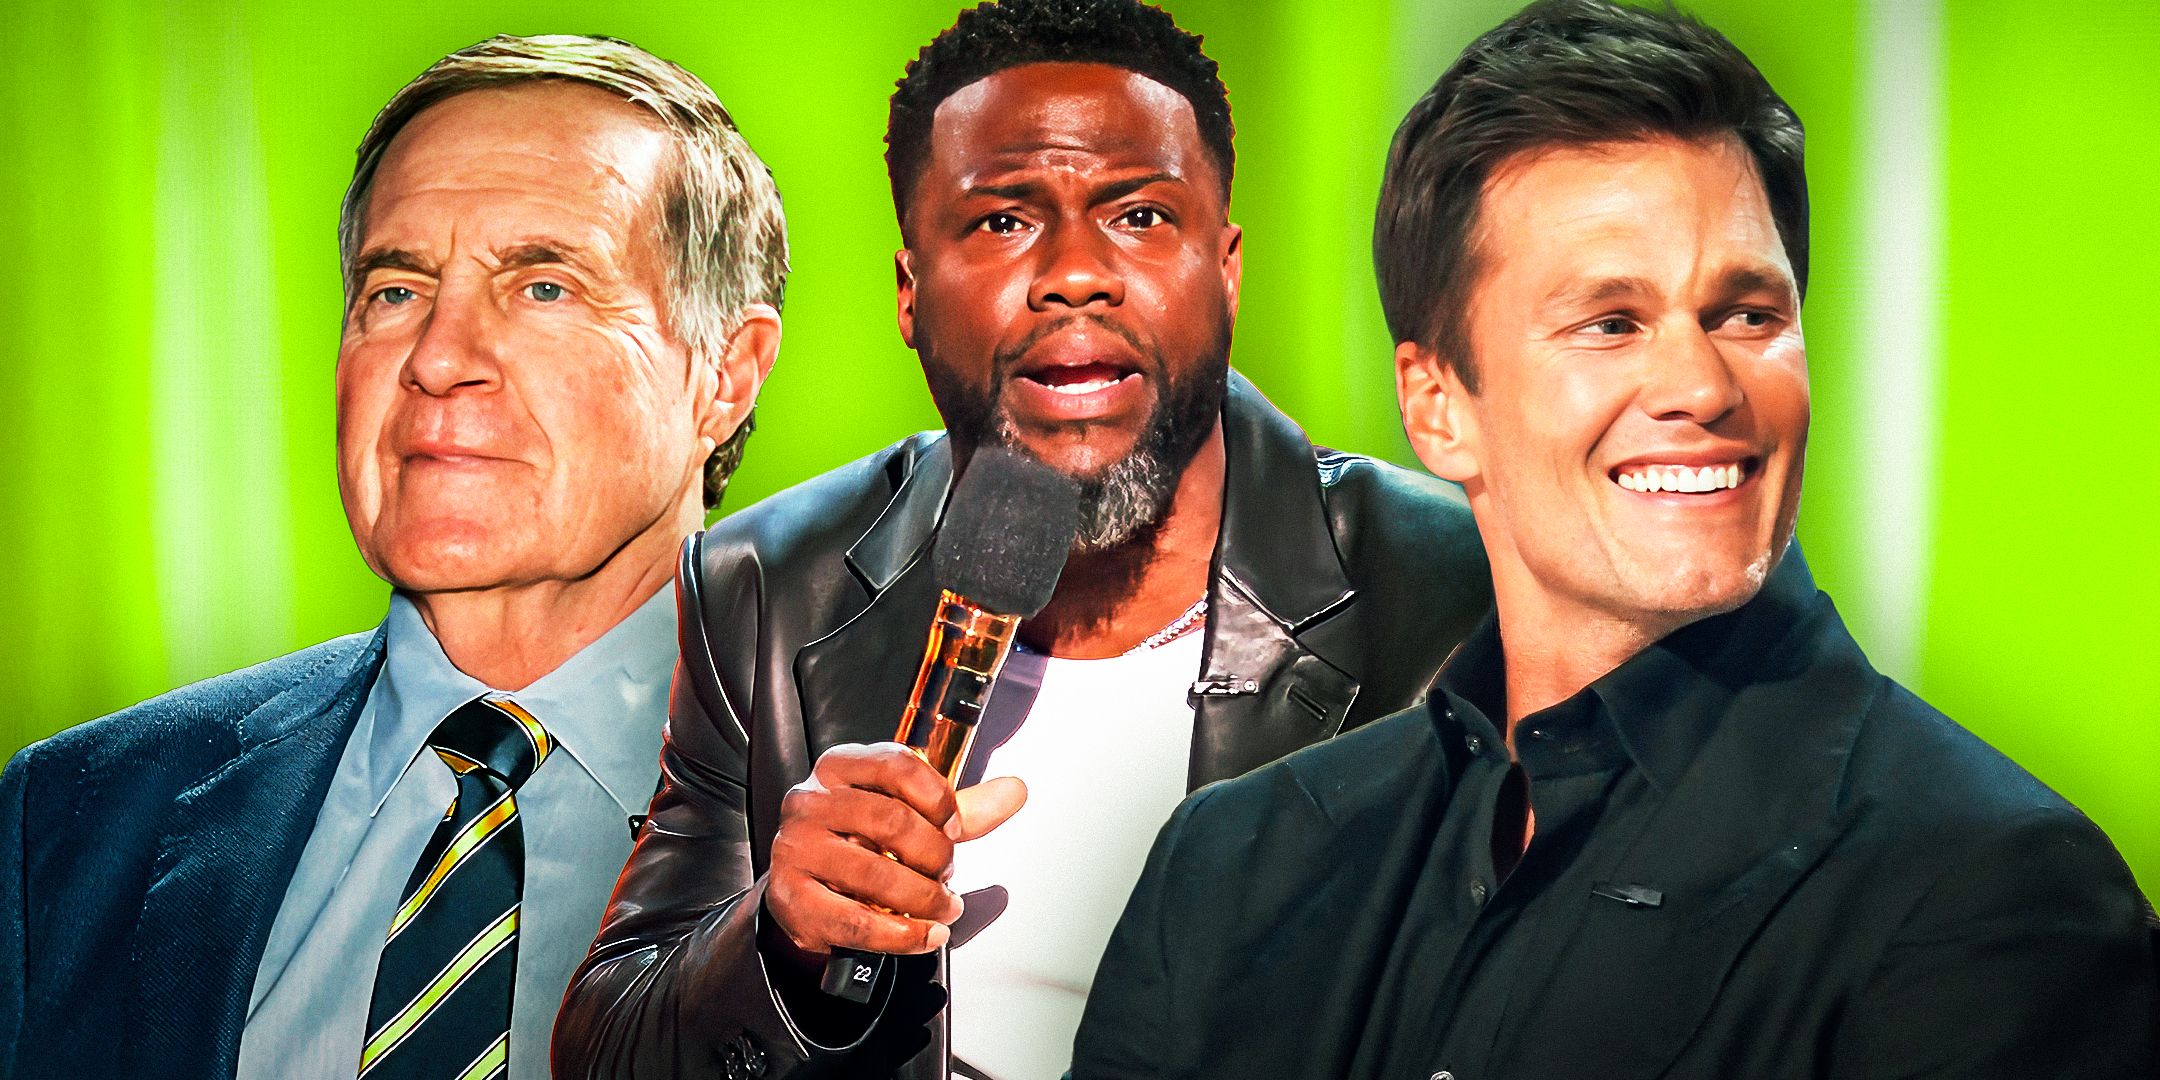 Tom-Brady,-Bill-Belichick,-and-Kevin-Hart-from-the-Netflix-special-The-Roast-of-Tom-Brady